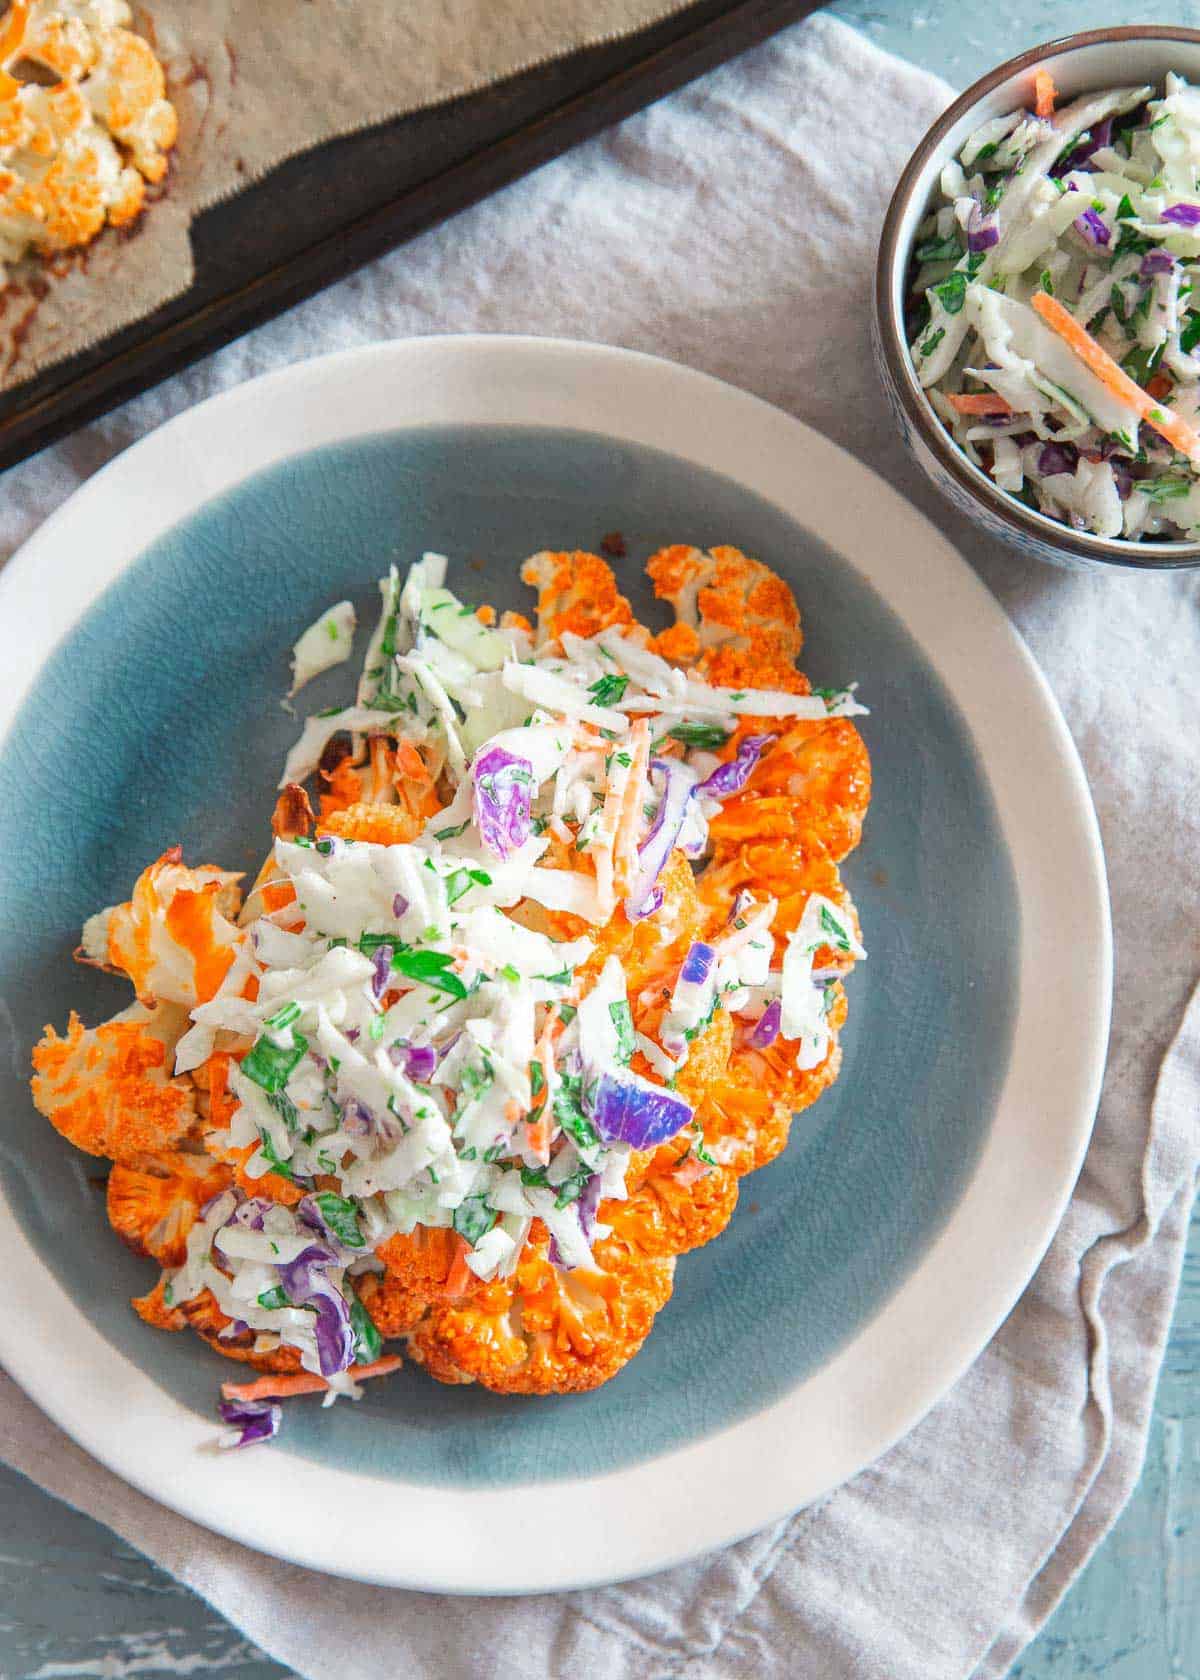 Buffalo sauce roasted cauliflower steaks are topped with a blue cheese coleslaw for a healthy game day bite!